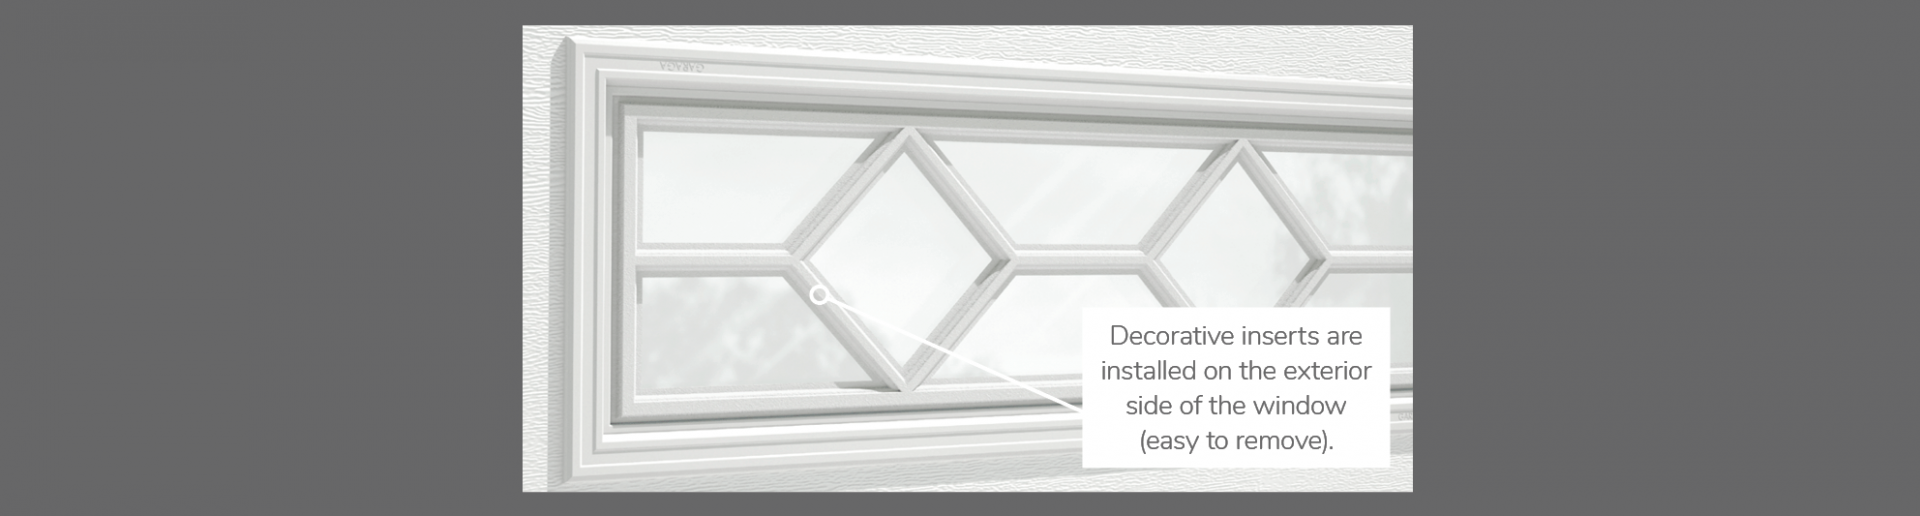 Waterton Decorative Insert, 21" x 13" and 40" x 13", available for door R-16, R-12